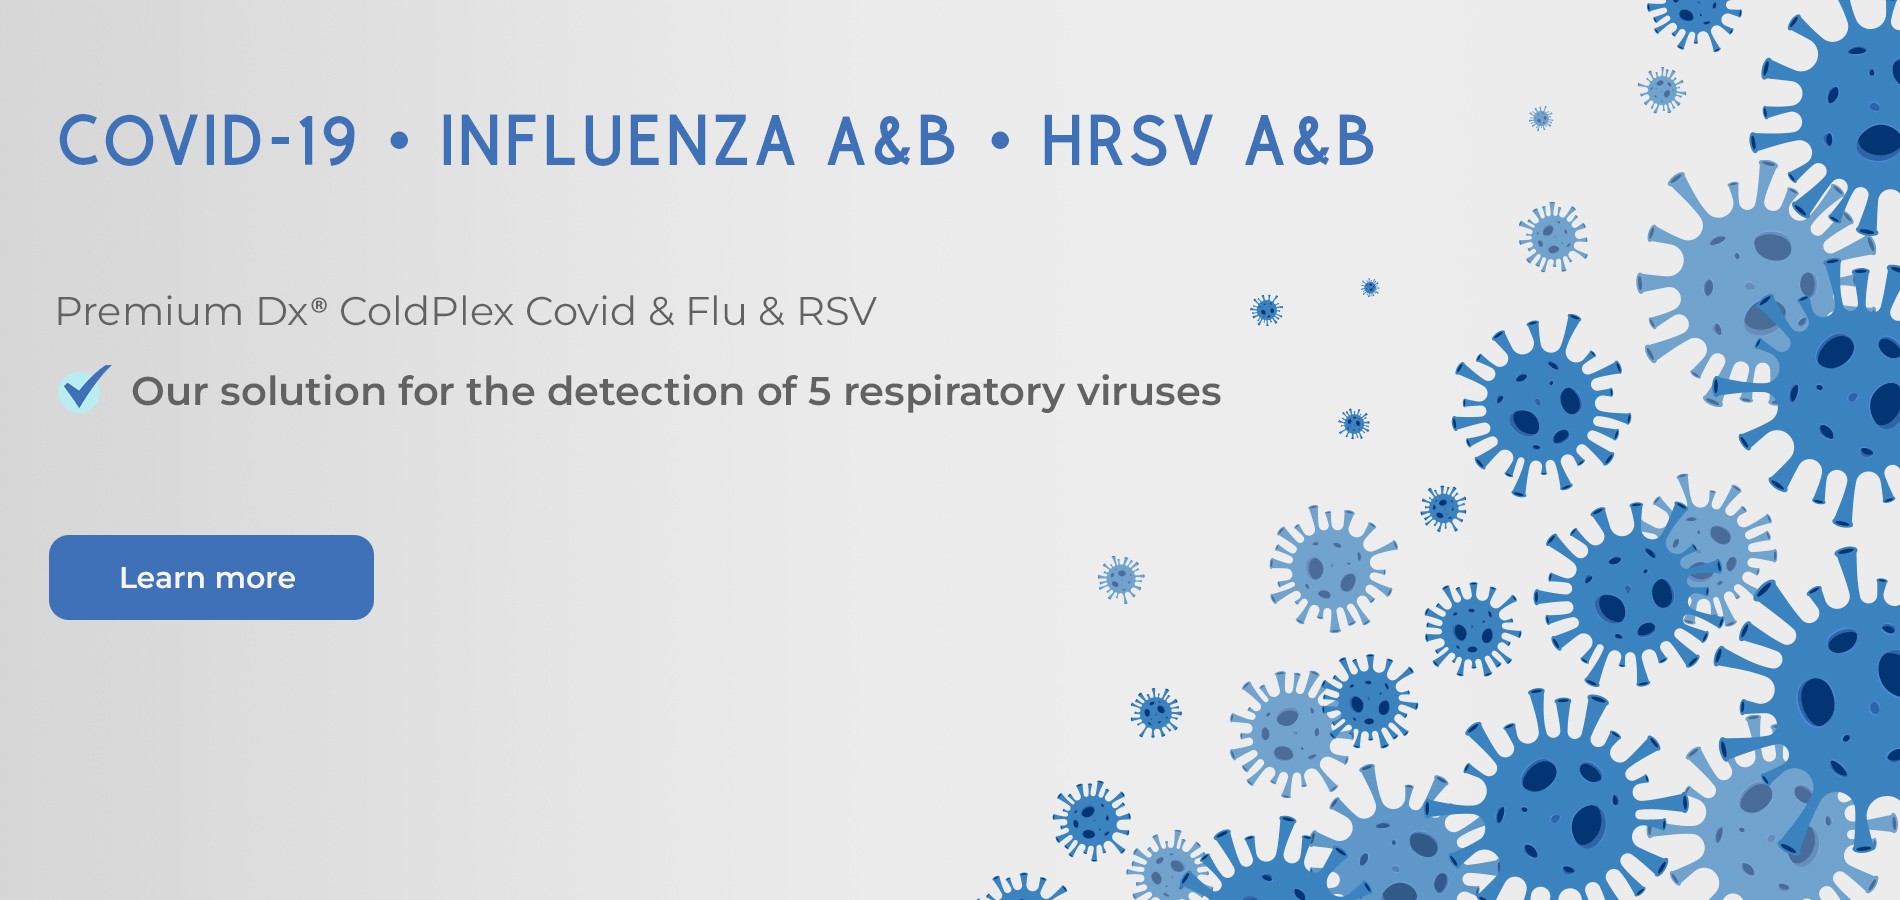 Our solution for the detection of 5 respiratory viruses